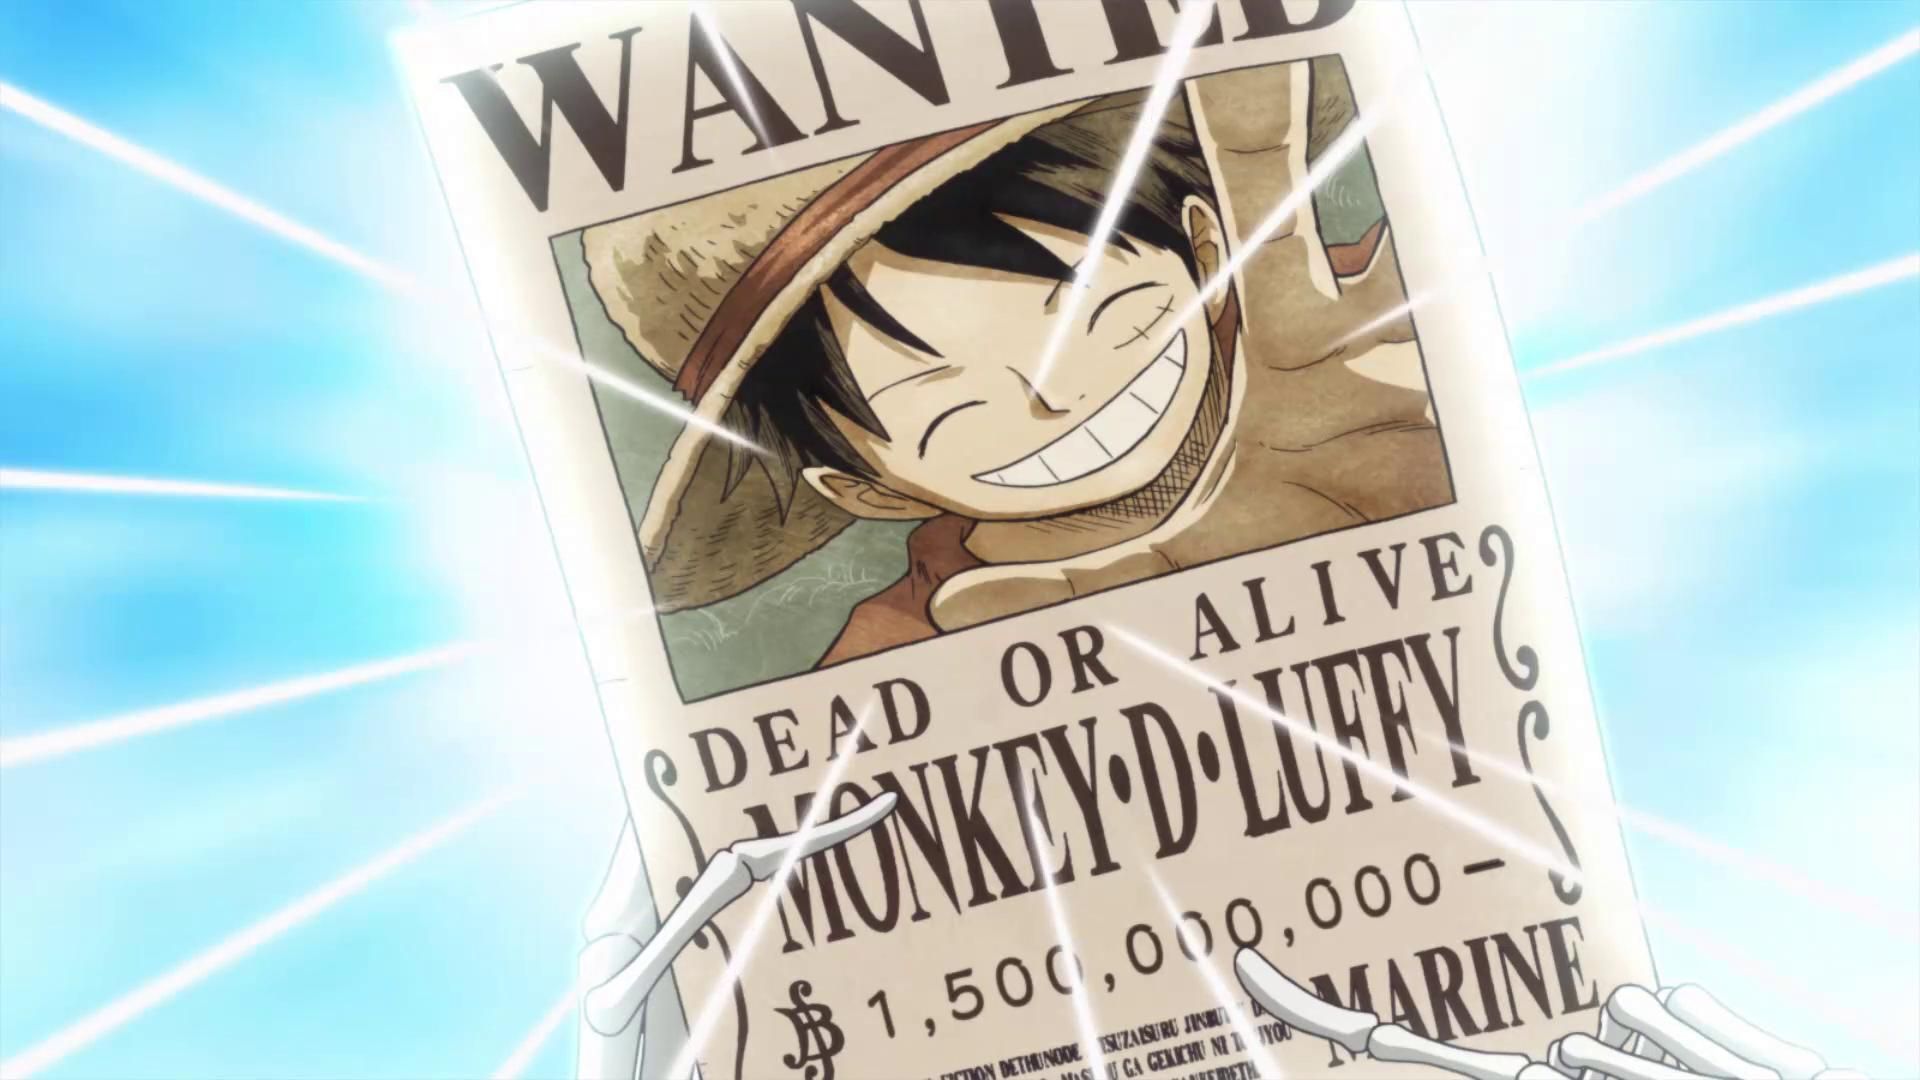 The D. is one of the most fascinating mysteries of One Piece (Image via Toei Animation, One Piece)